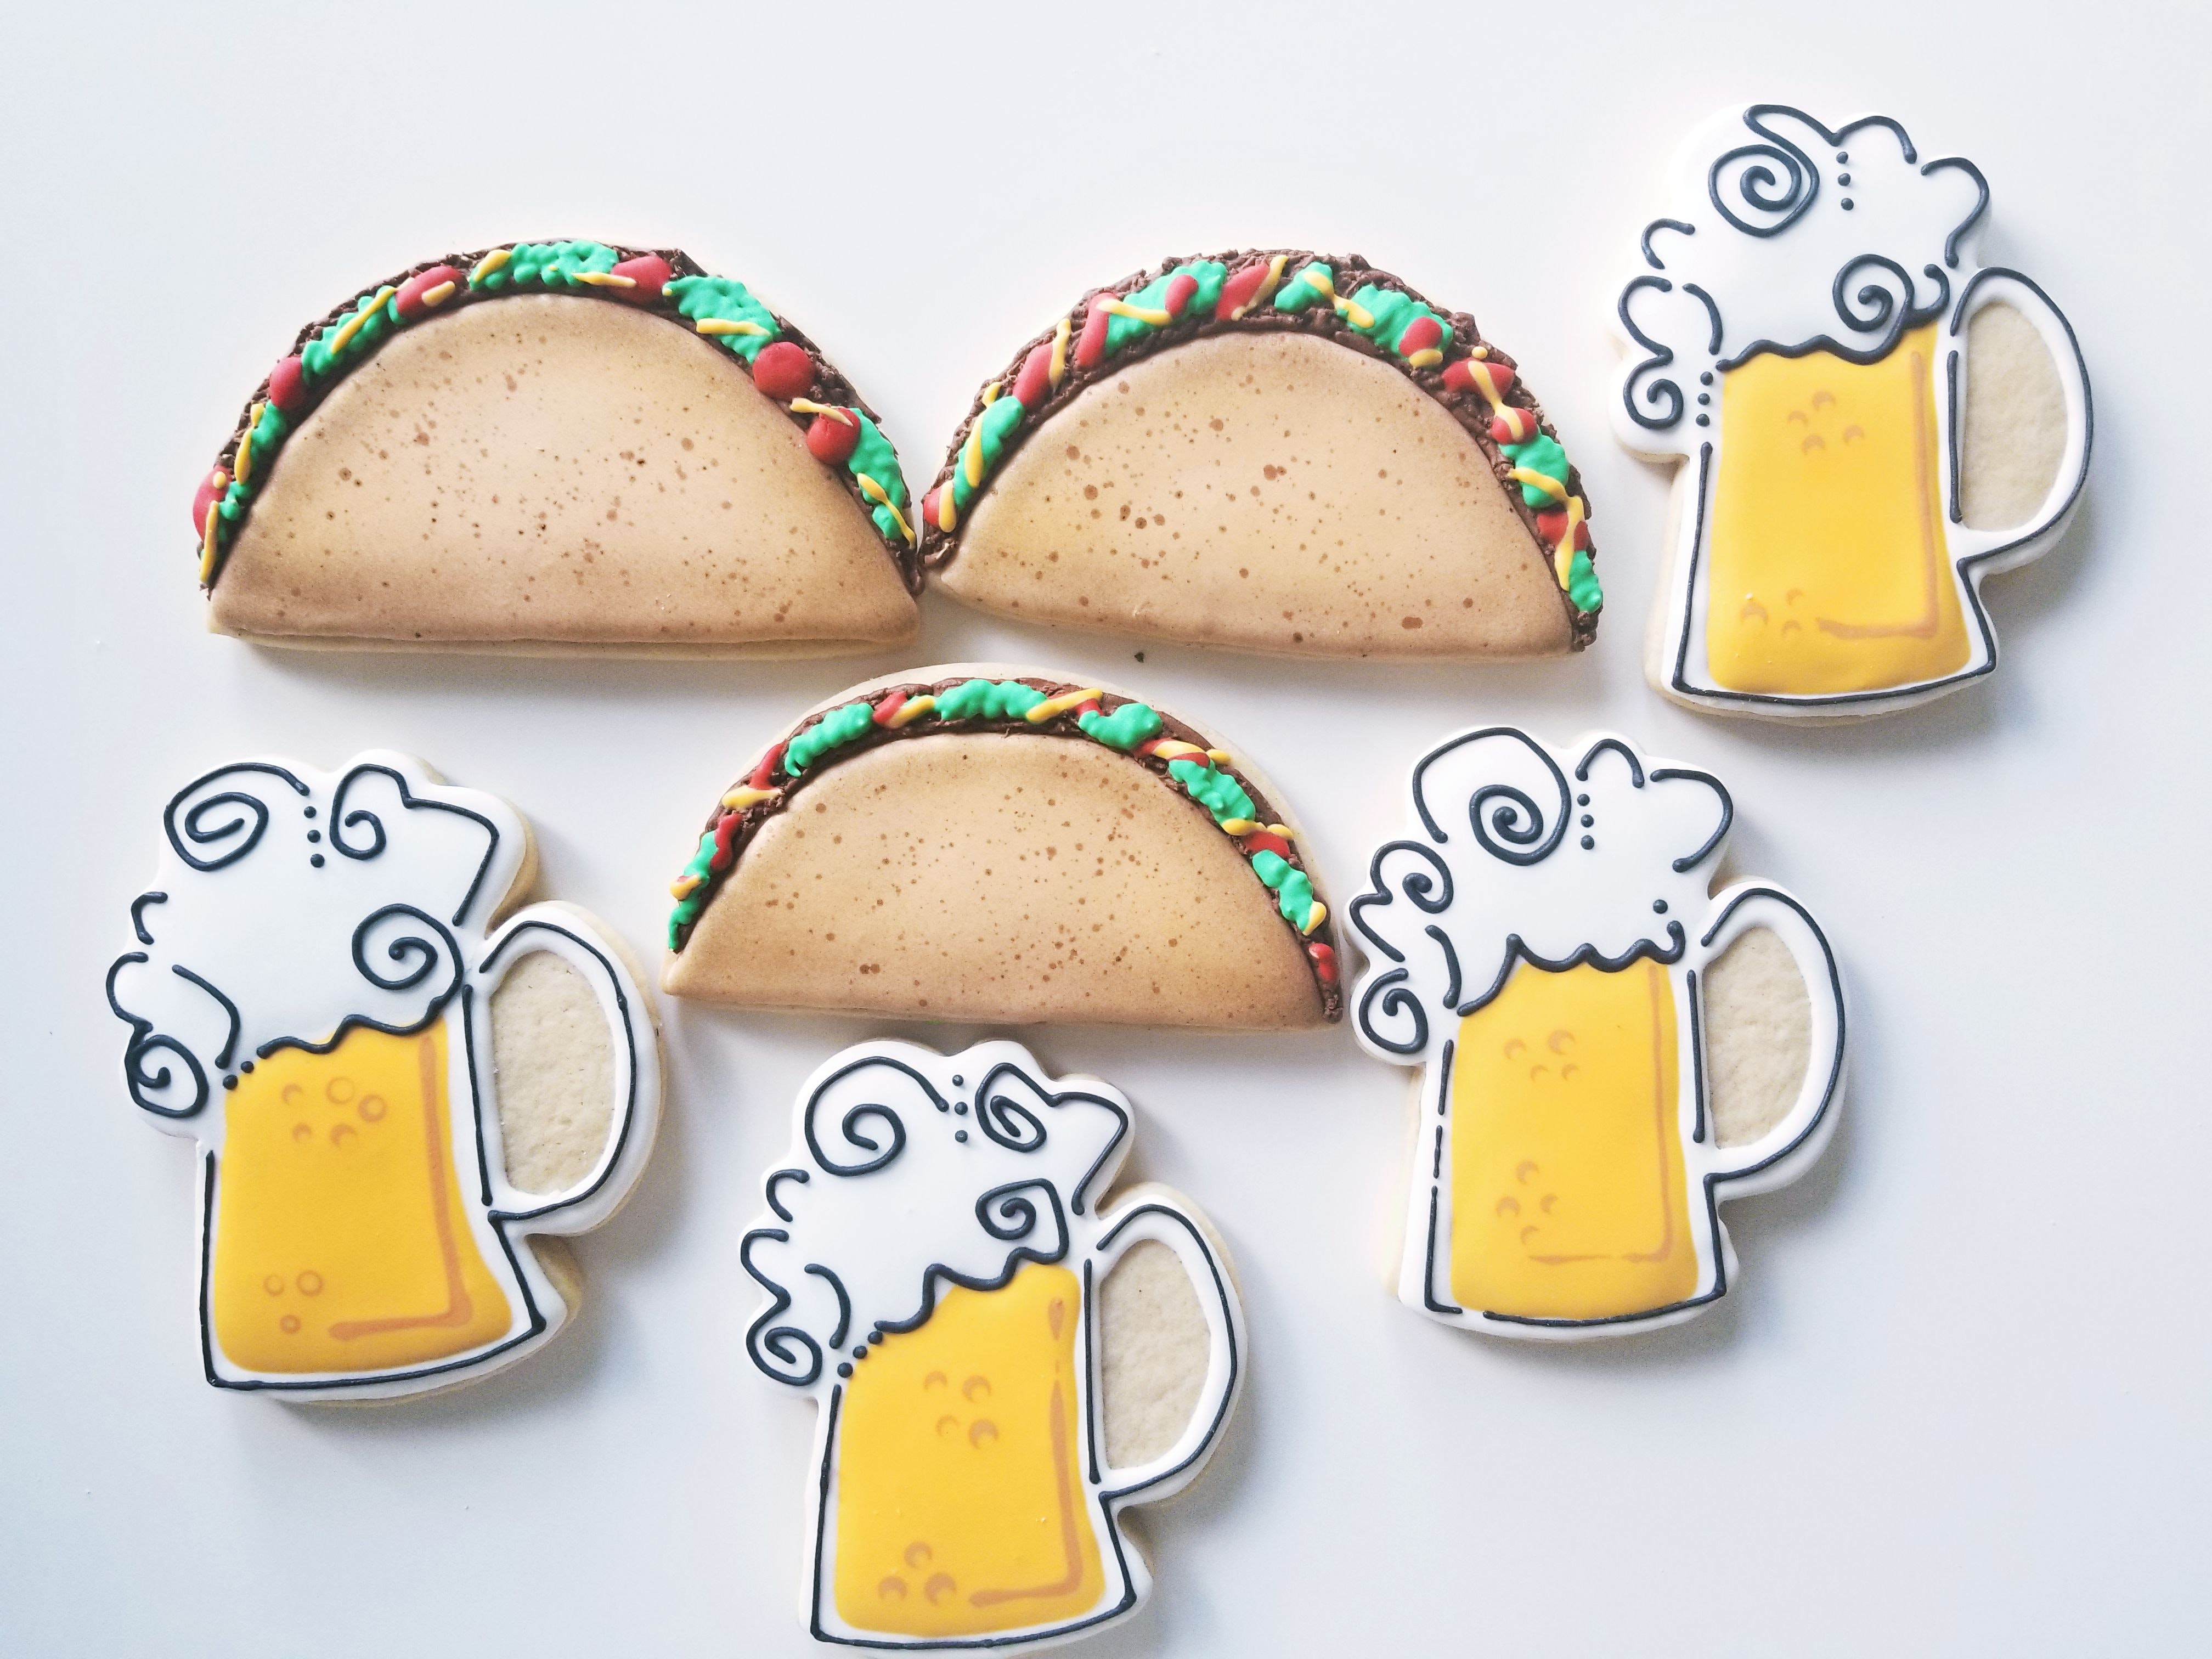 Tacos and beer illustration